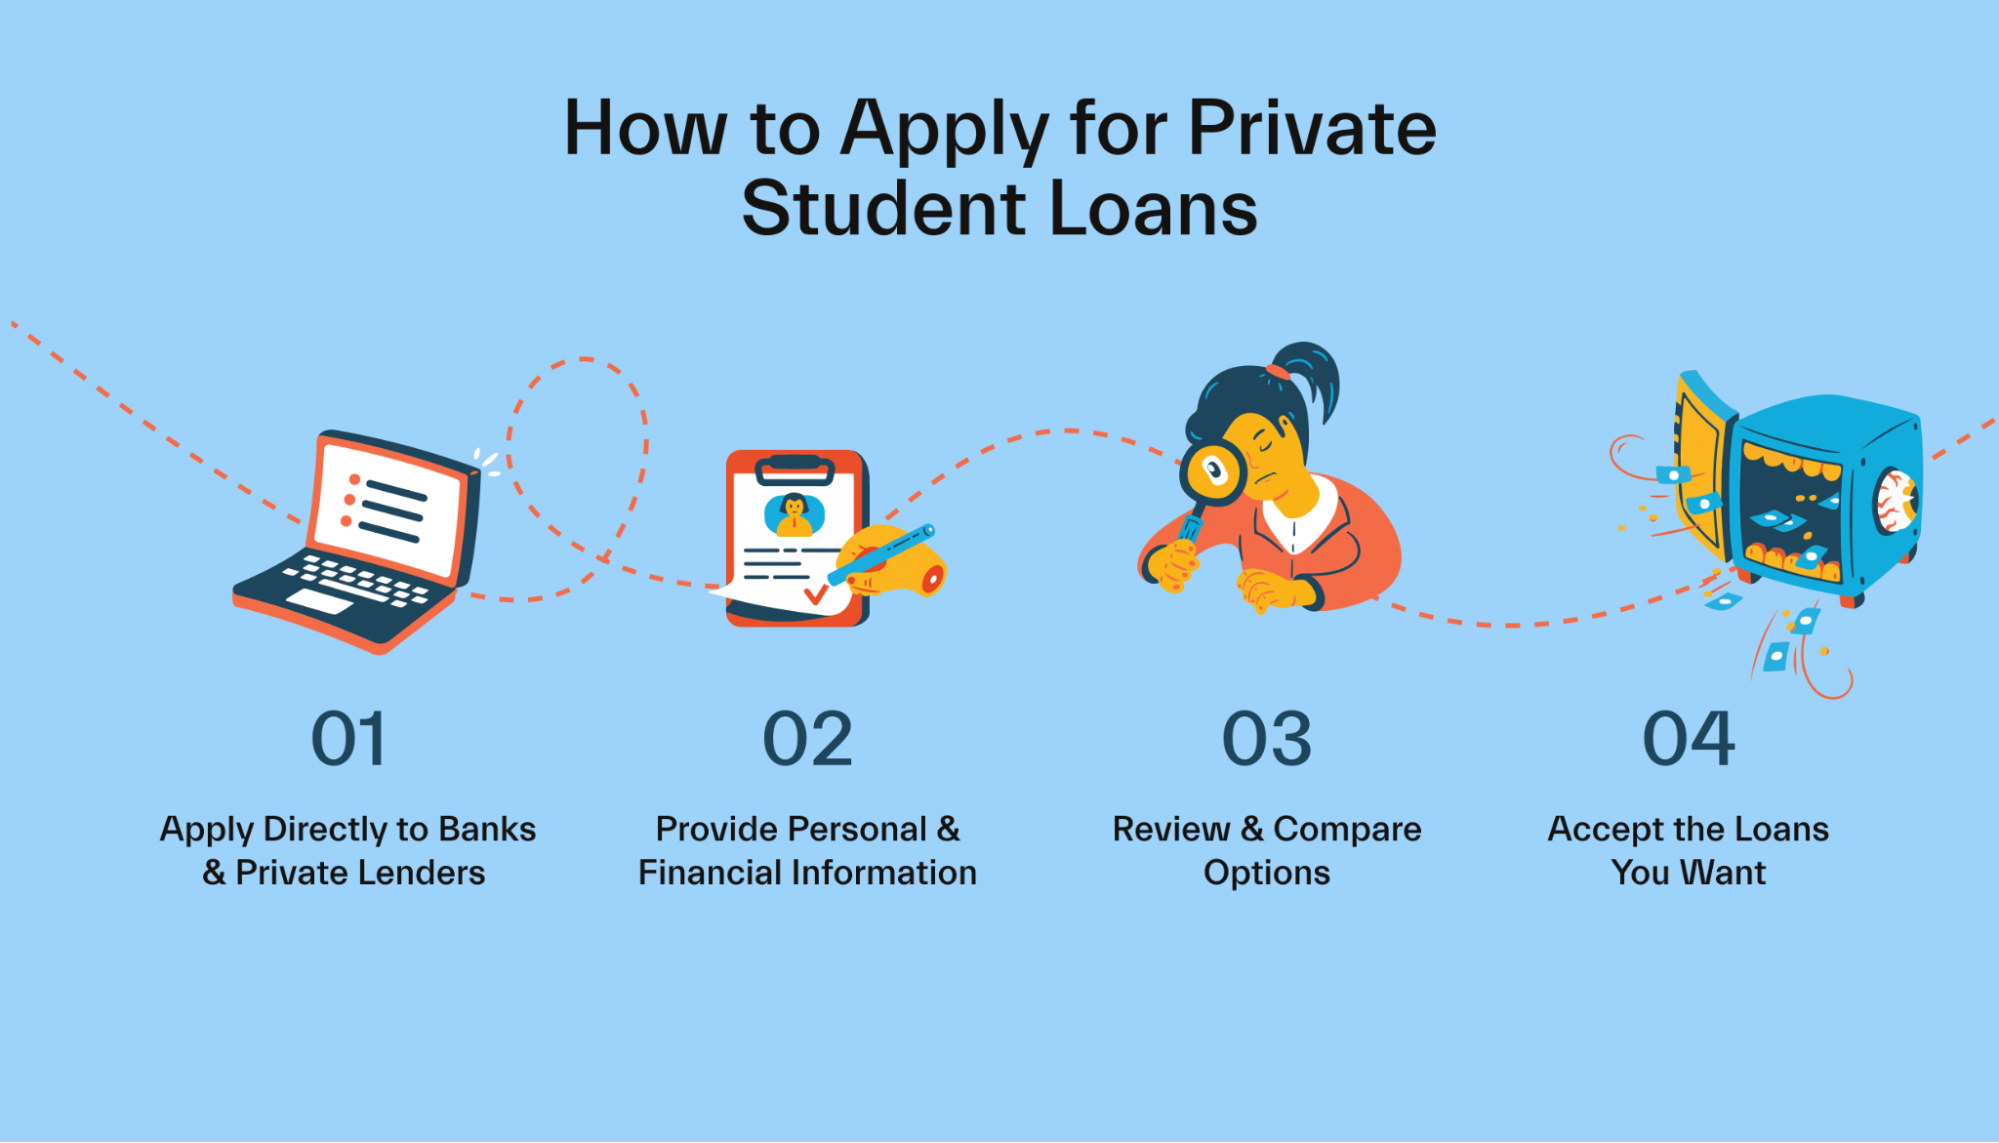 Applying for Private Student Loans